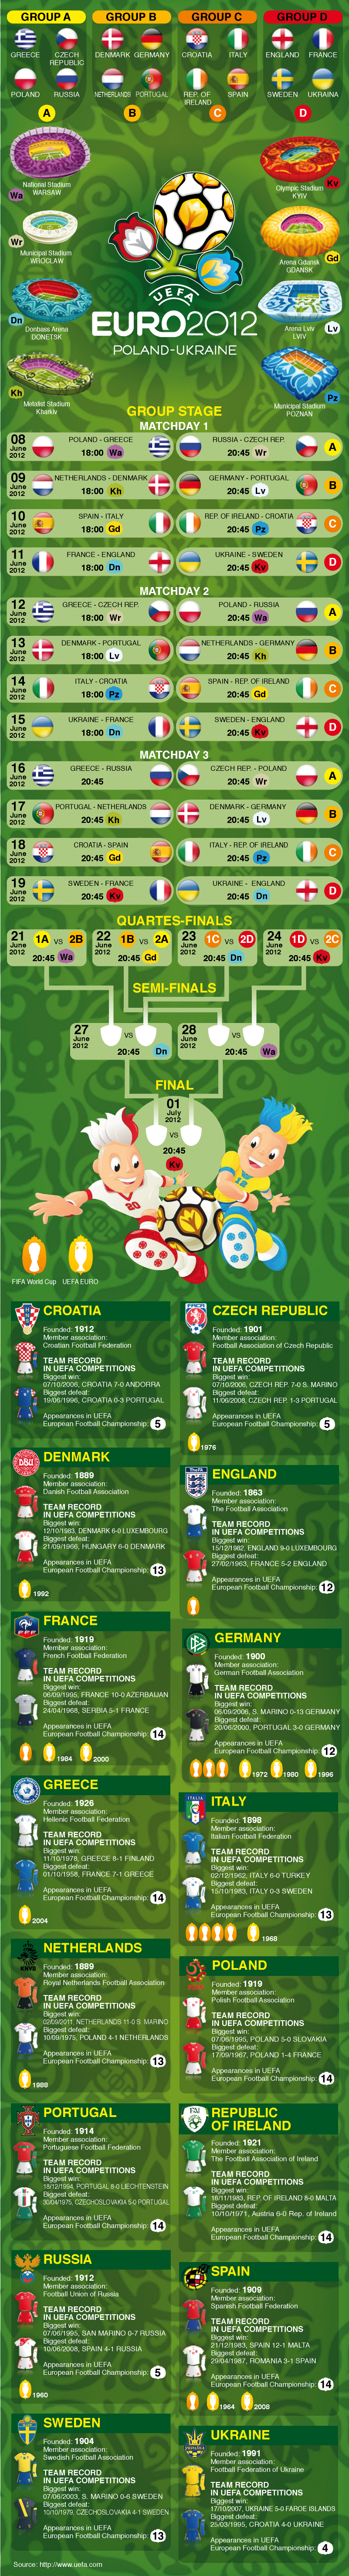 Euocup 2012 Infographic